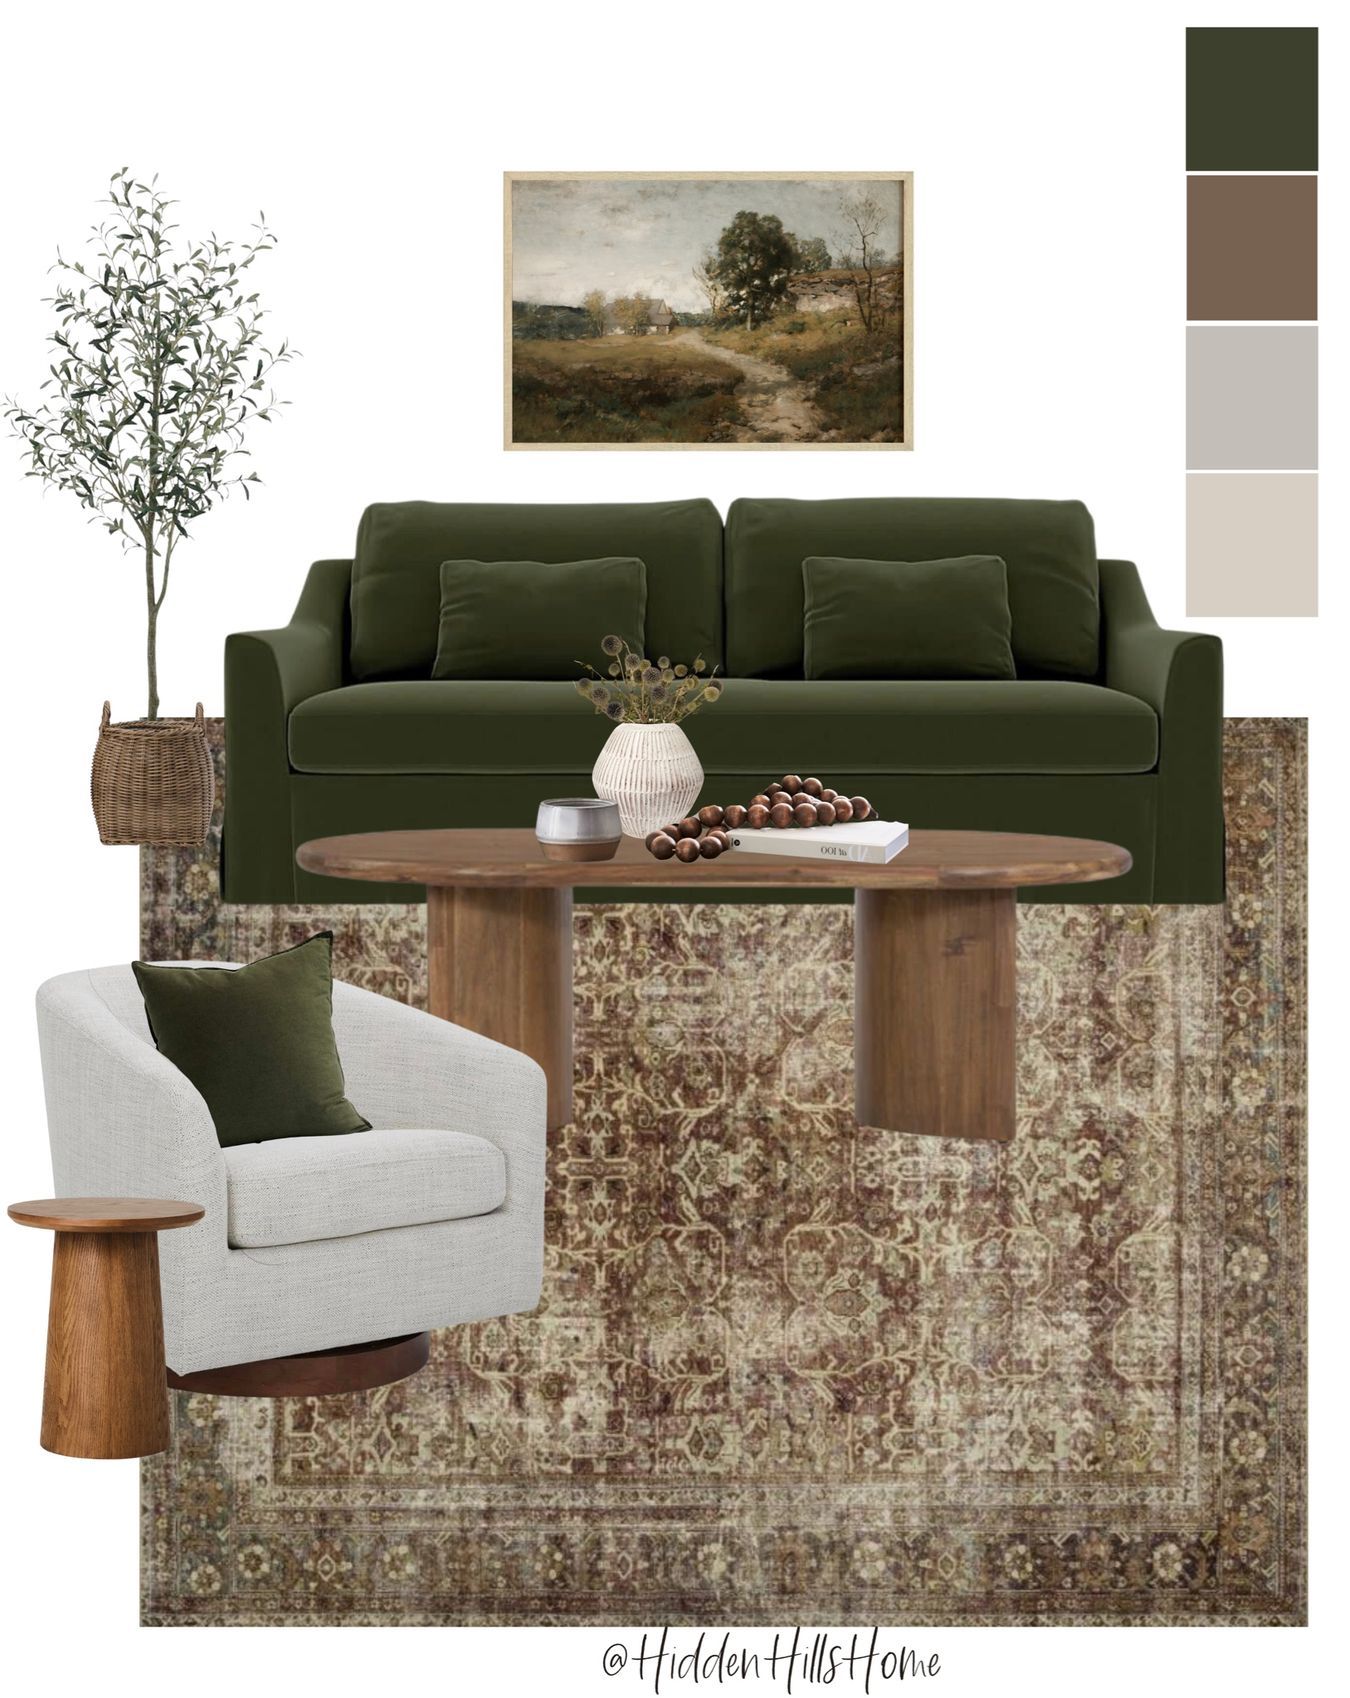 The Benefits of Choosing a Green Sofa for
Your Home